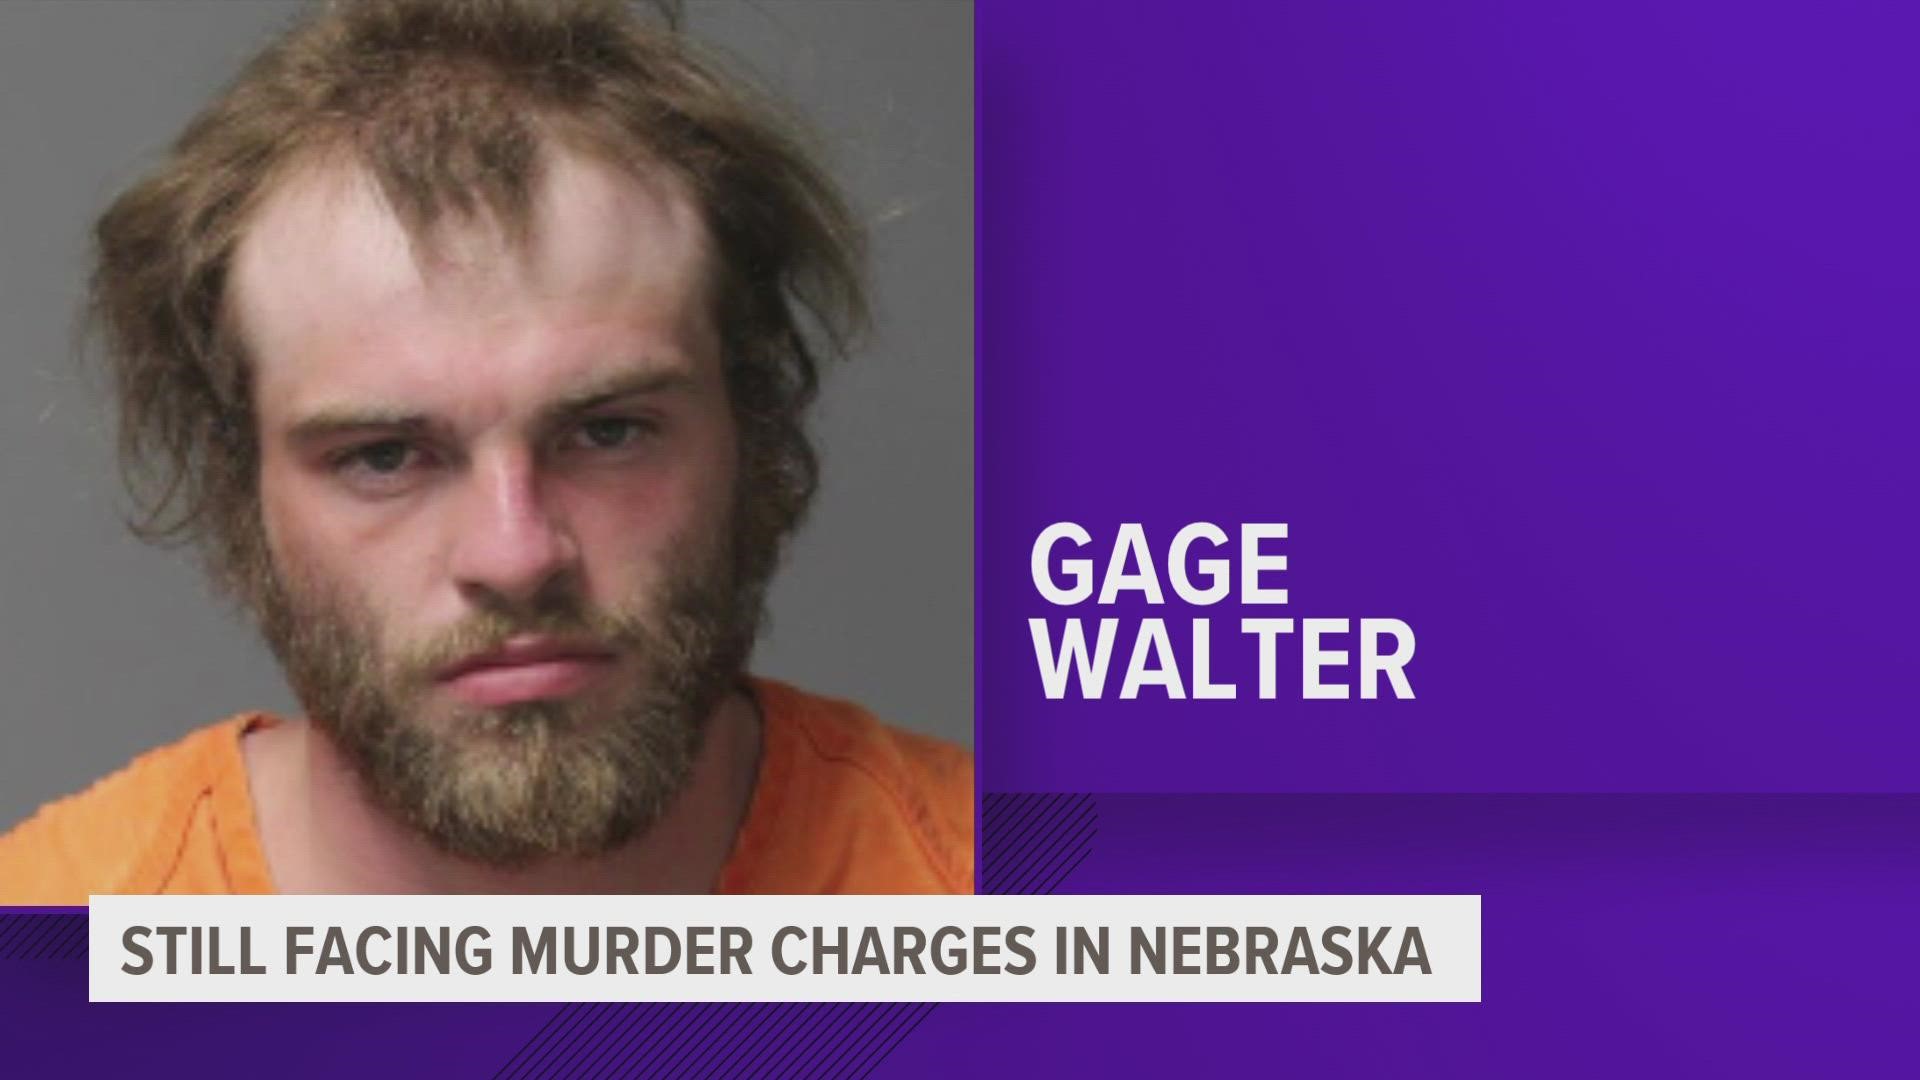 27-year-old Gage Walter was originally charged in Iowa with possession of a stolen vehicle and fleeing from police. The charges against him in Nebraska still stand.